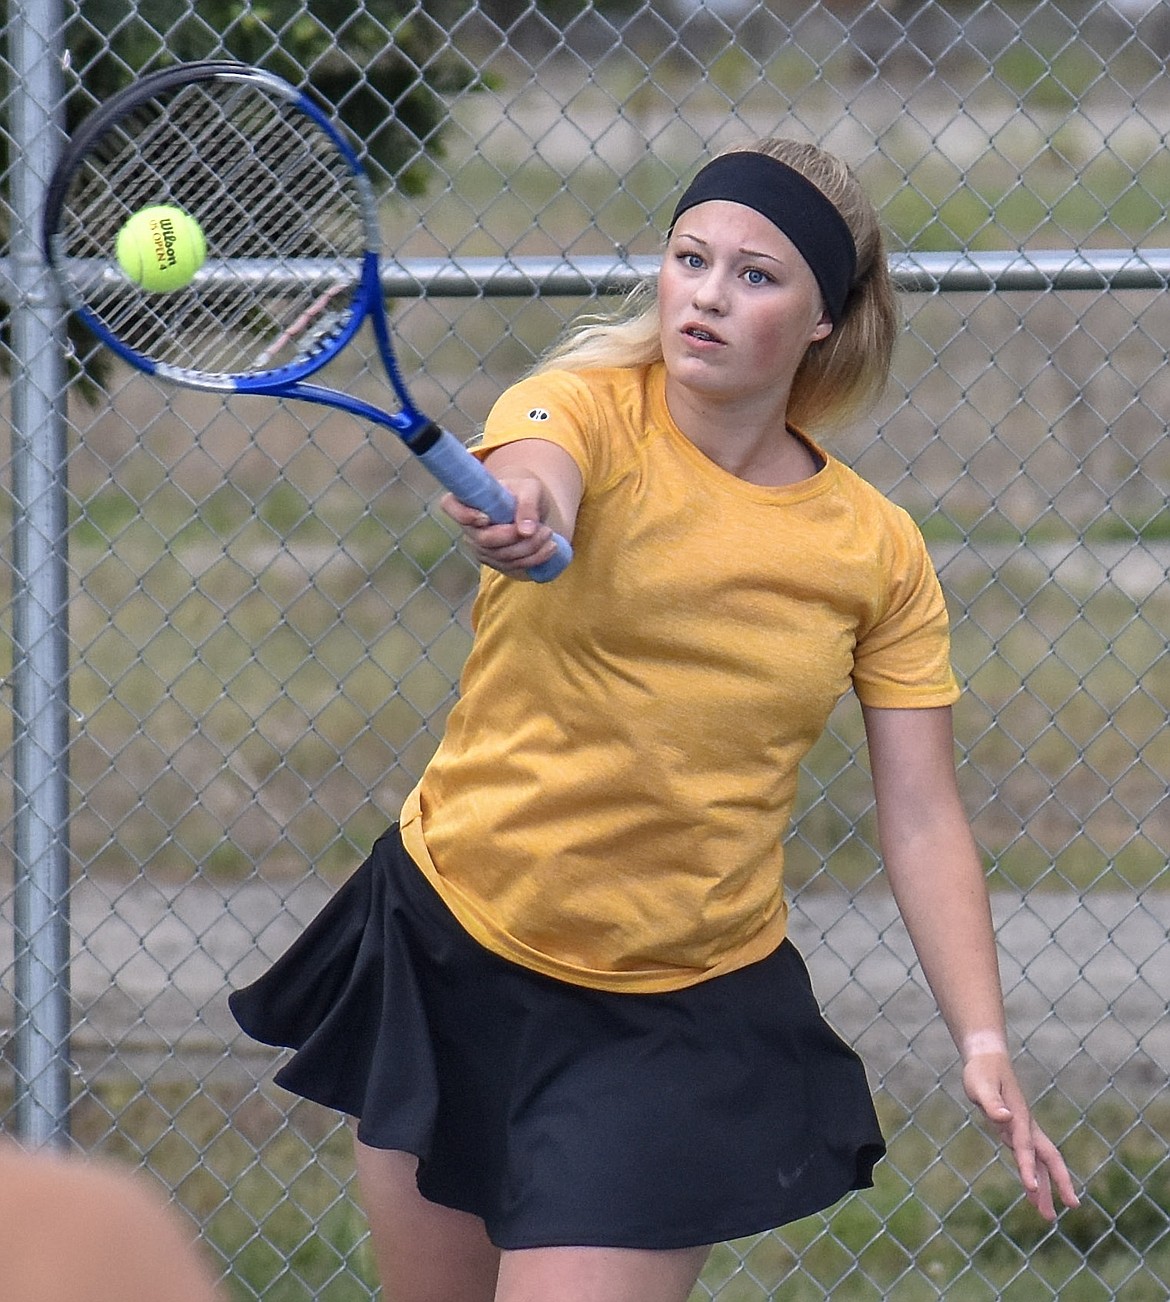 Morgan Snyder and doubles partner Laurynn Lauer made it to the semifinal round of divisional play at Libby on Friday, May 18, but were unable to advance. (Ben Kibbey/The Western News)